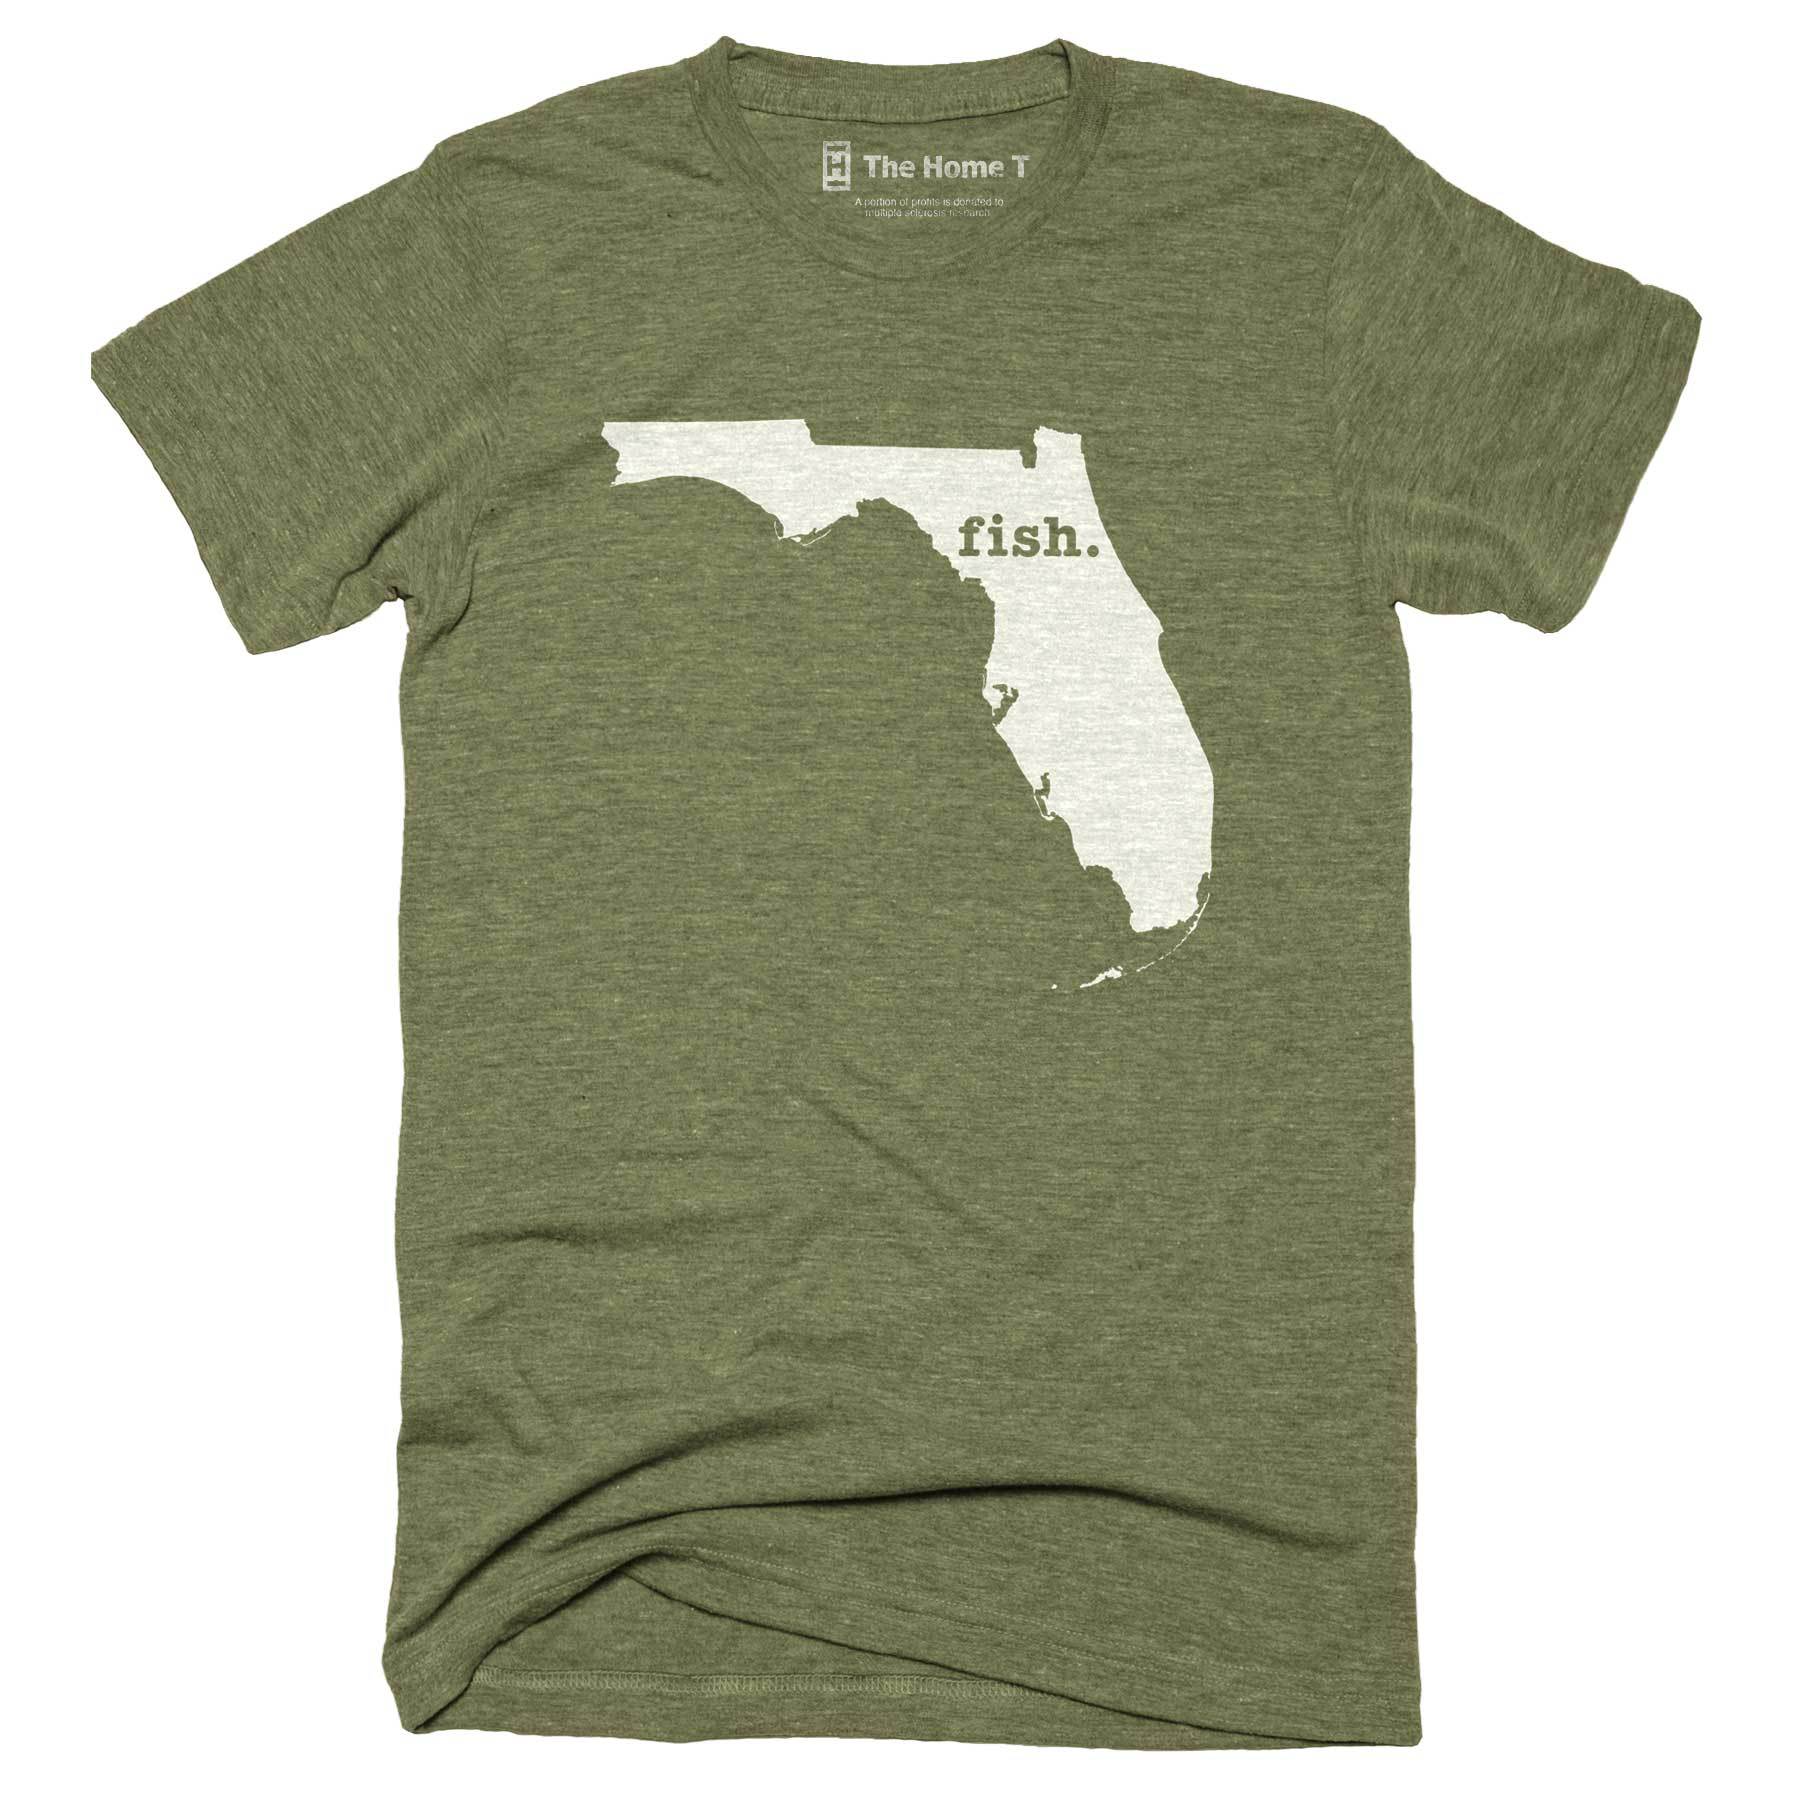 Florida Fish Home T-Shirt Outdoor Collection The Home T XXL Army Green